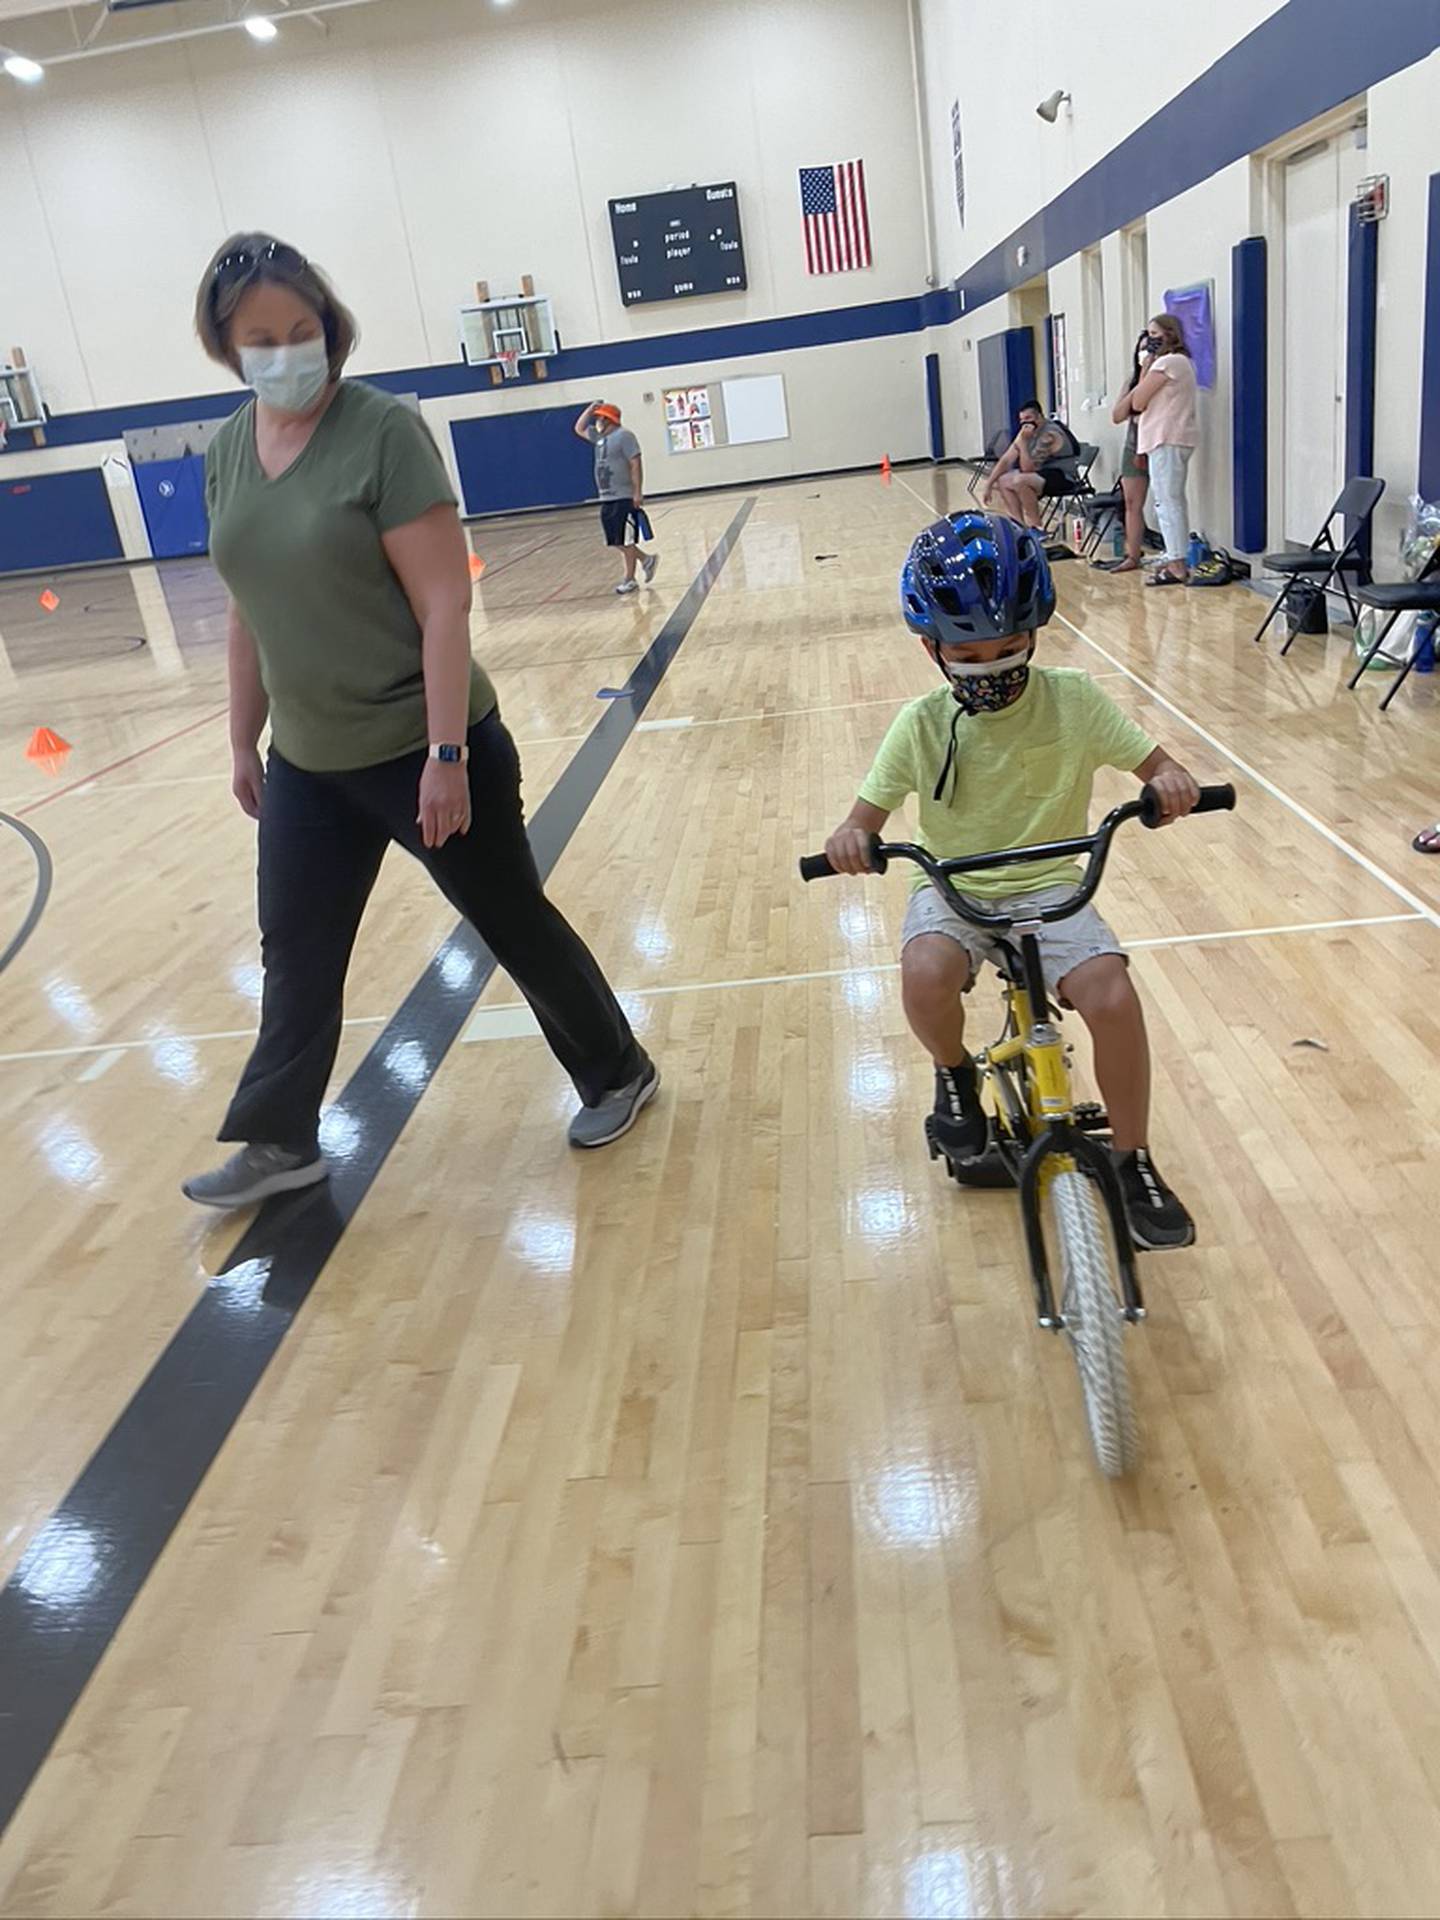 Brody Baumgardner practices the help of his bike skills under the watchful eye of volunteer Jana Ellison. The iCan Bike program, which teaches people with disabilities ages 8 and up to ride a conventional two-wheel bike, was held June 14 to June 18, 2021, at Spencer Crossing School in New Lenox.